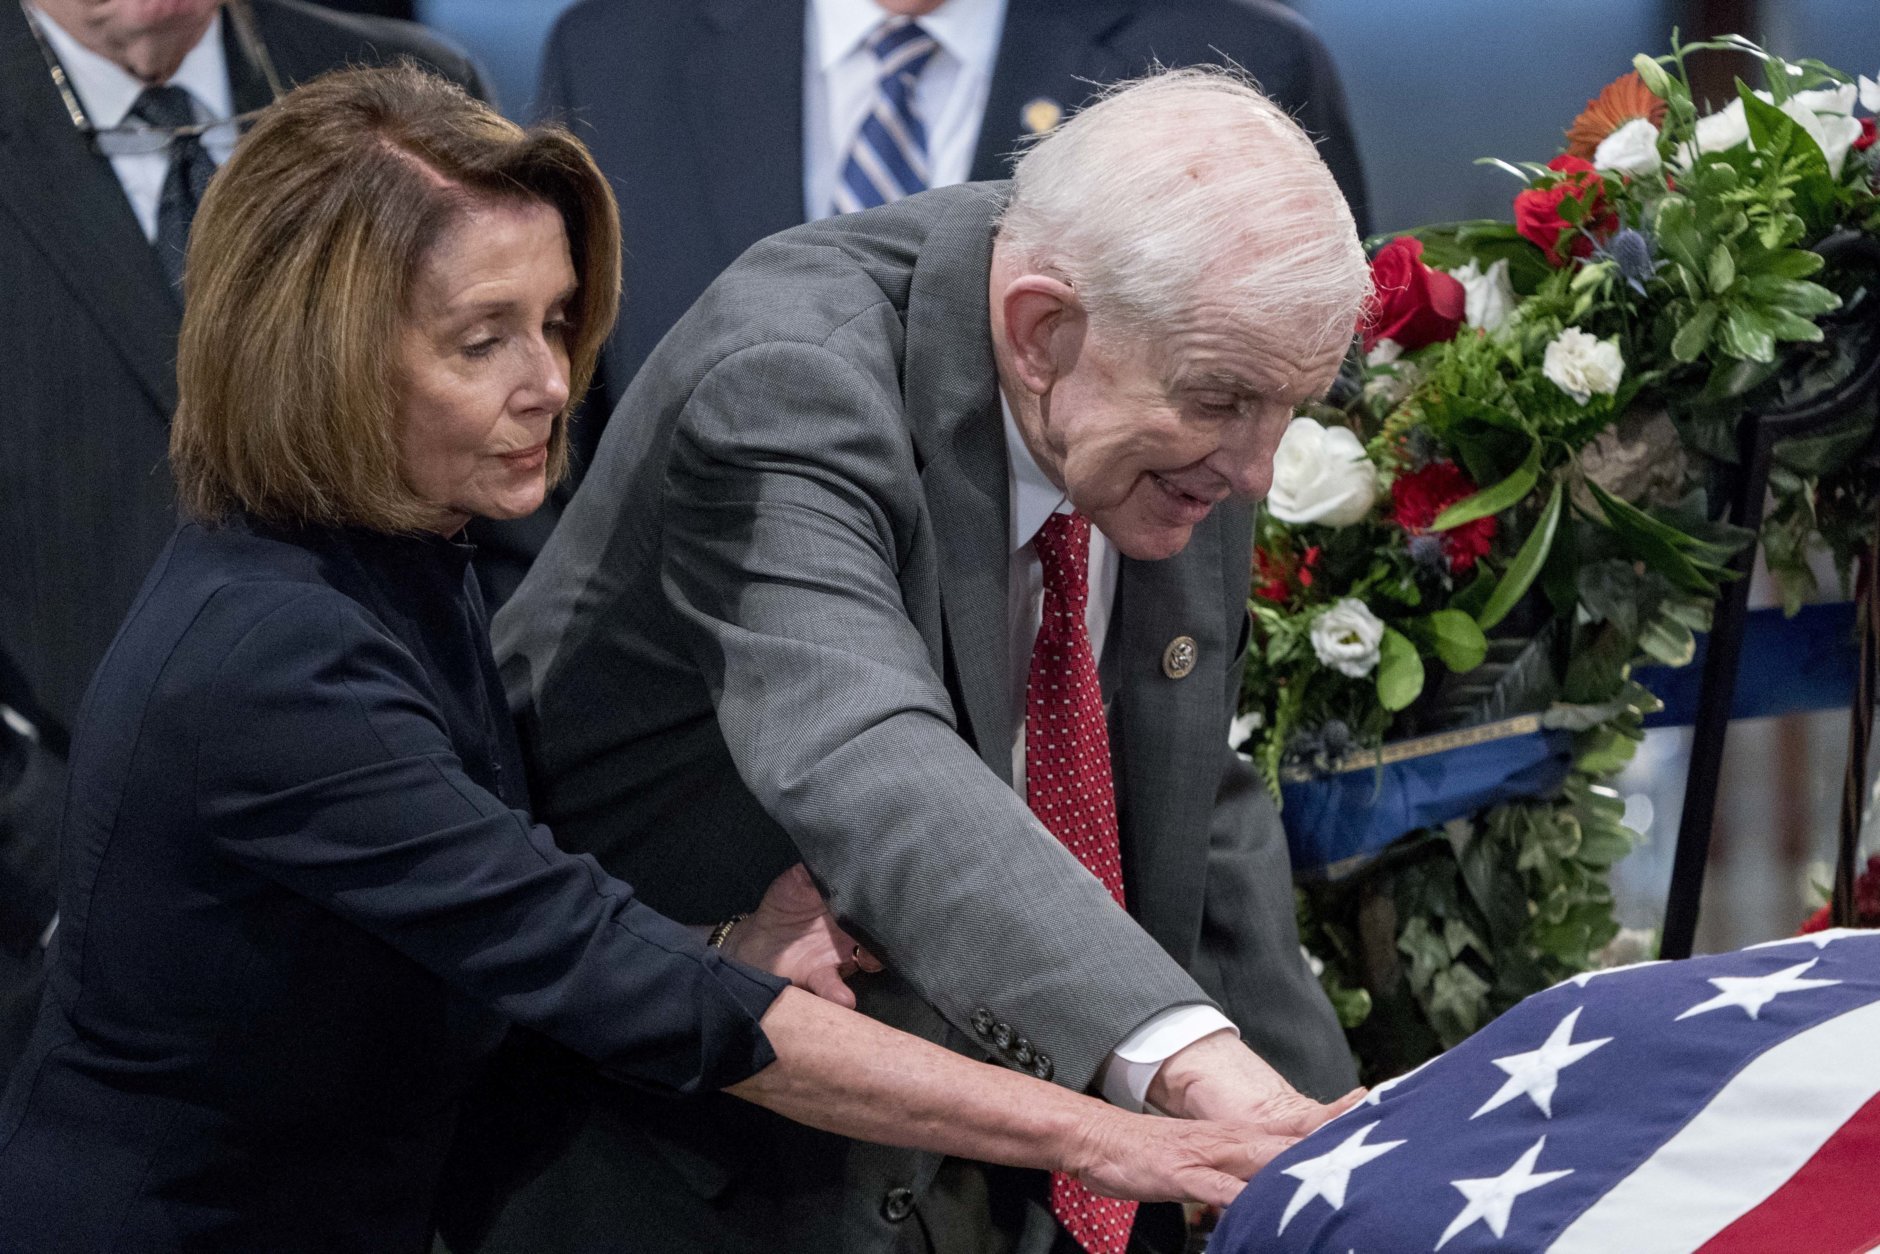 House Minority Leader Nancy Pelosi of Calif., left, and Rep. Sam Johnson, R-Texas, right, touch the casket of Sen. John McCain, R-Ariz., as he lies in state in the Rotunda of the U.S. Capitol, Friday, Aug. 31, 2018, in Washington. (AP Photo/Andrew Harnik, Pool)